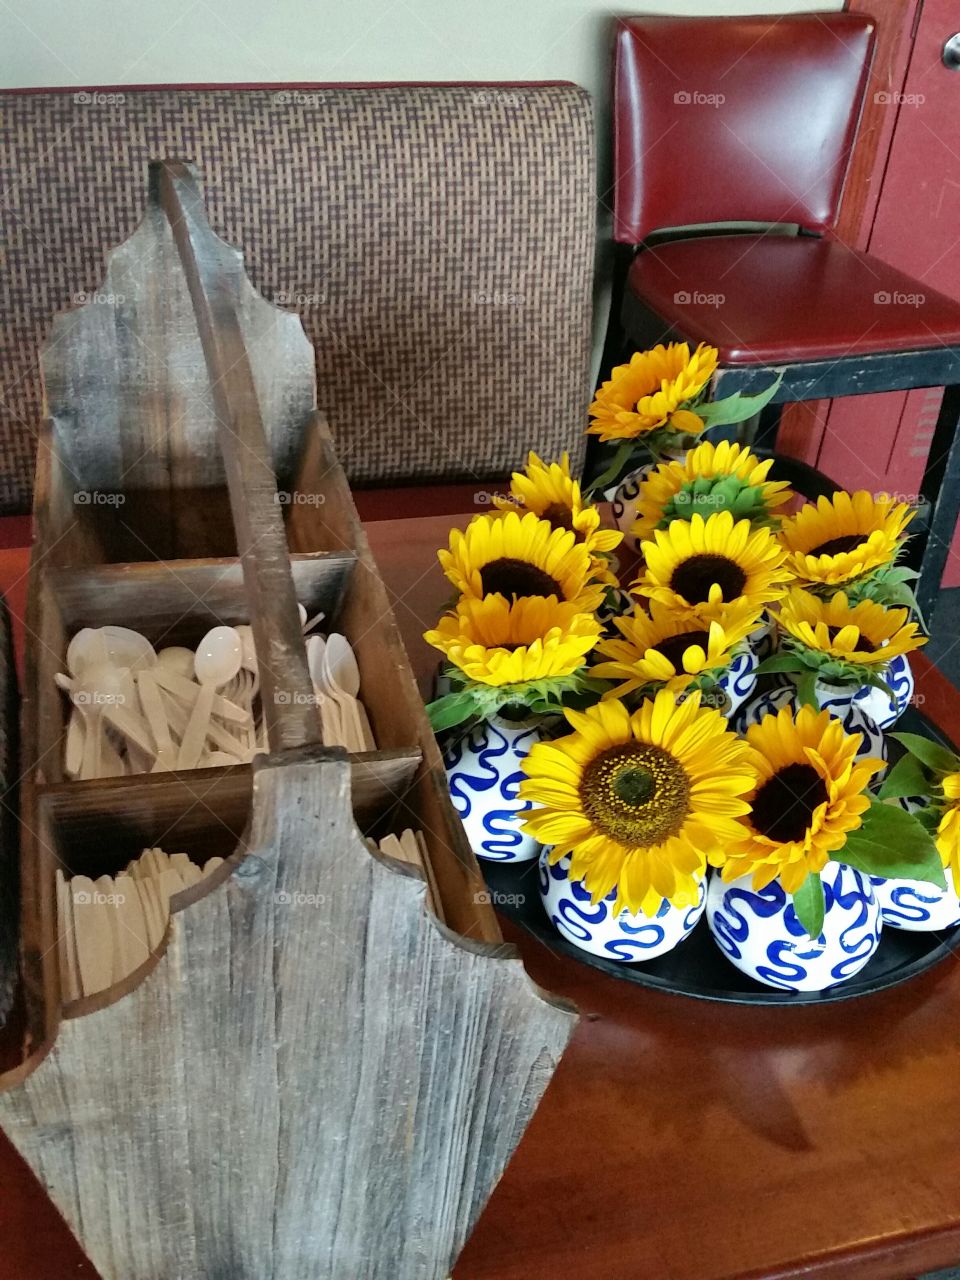 Yellow Sunflowers in vases. Flowers waiting to take their place on tables